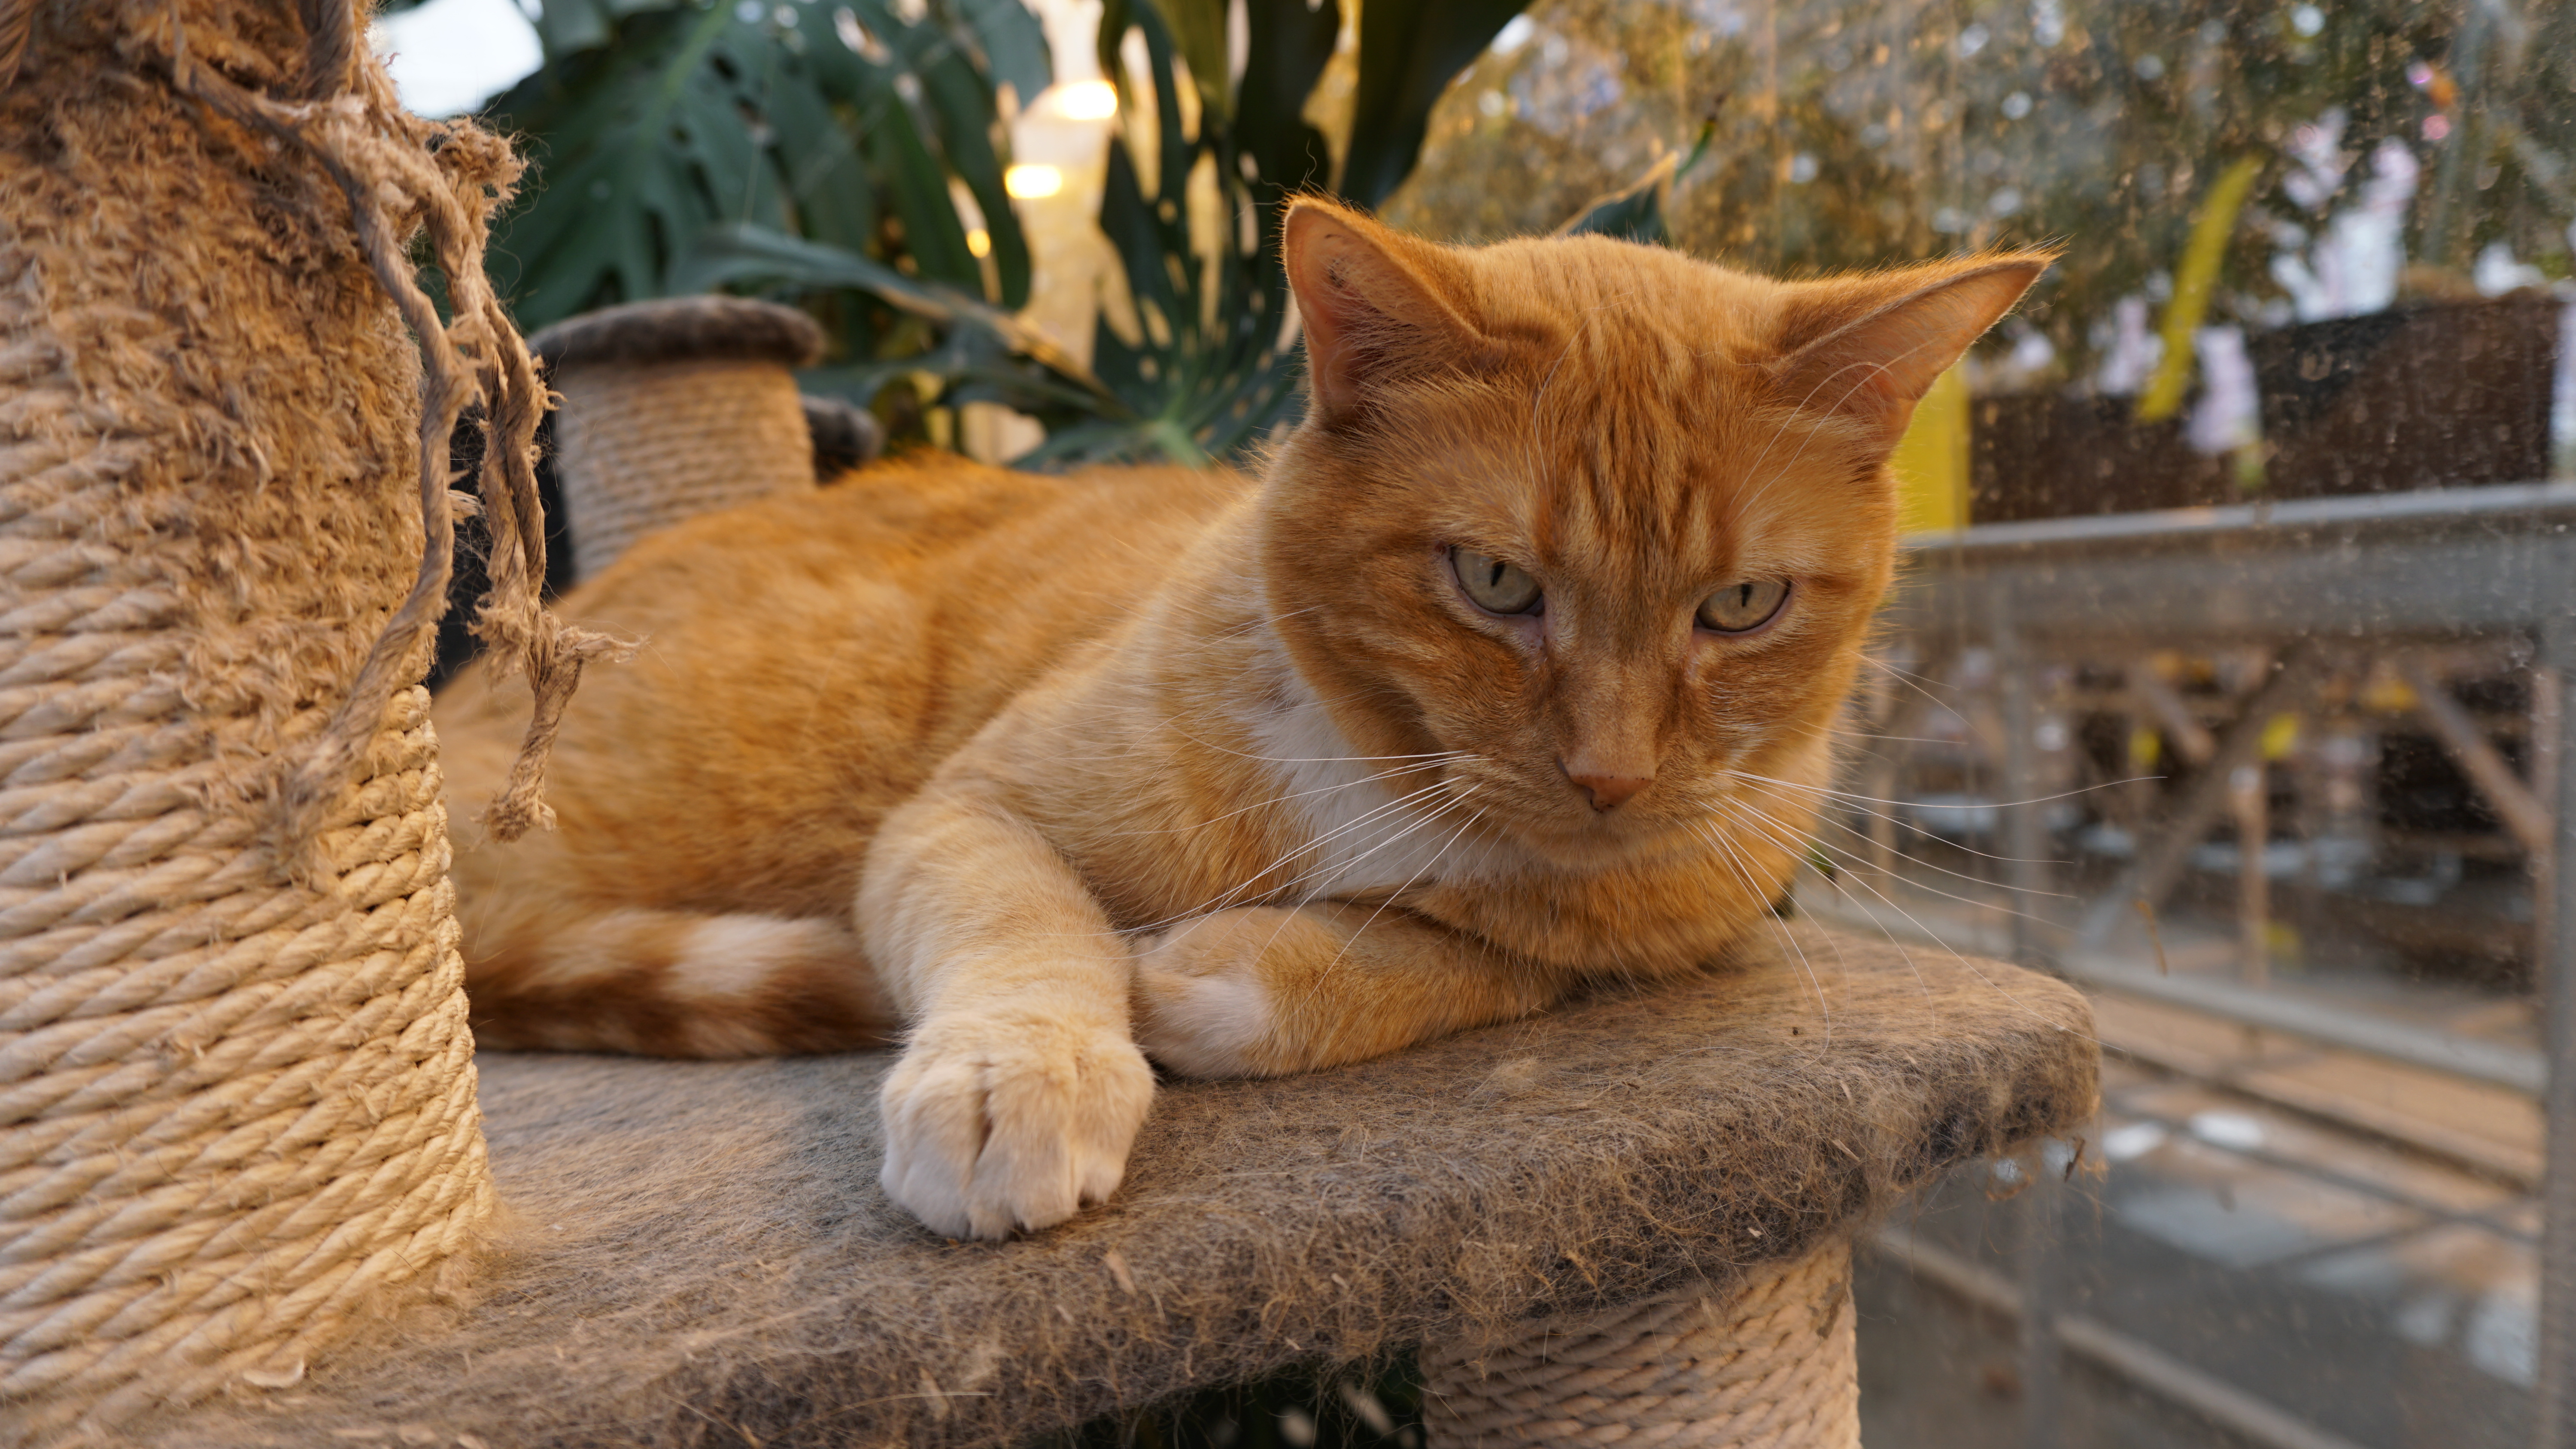 Charlie, a male ginger tabby